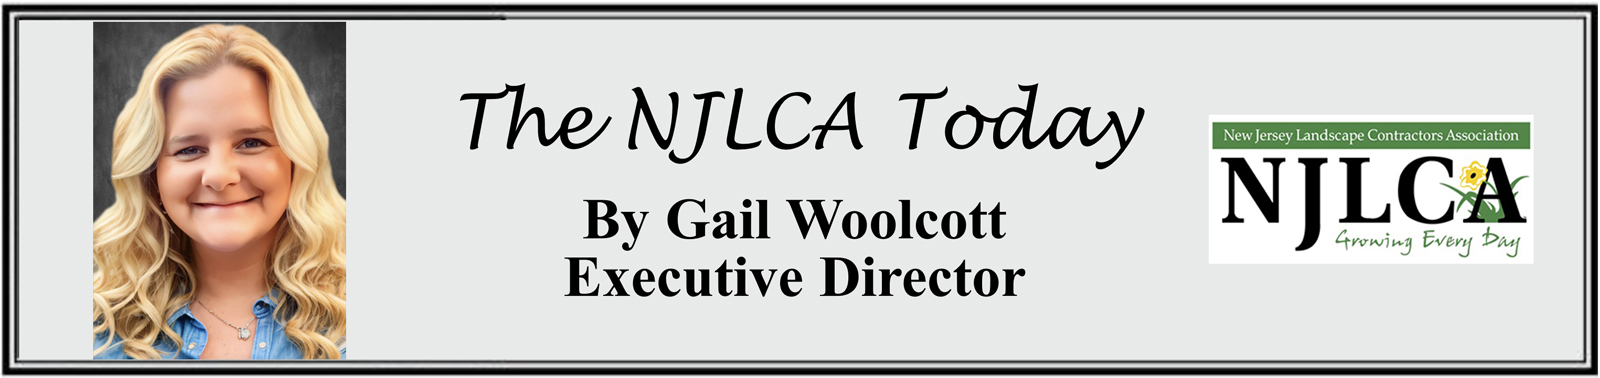 The NJLCA Today by Gail Wolcott